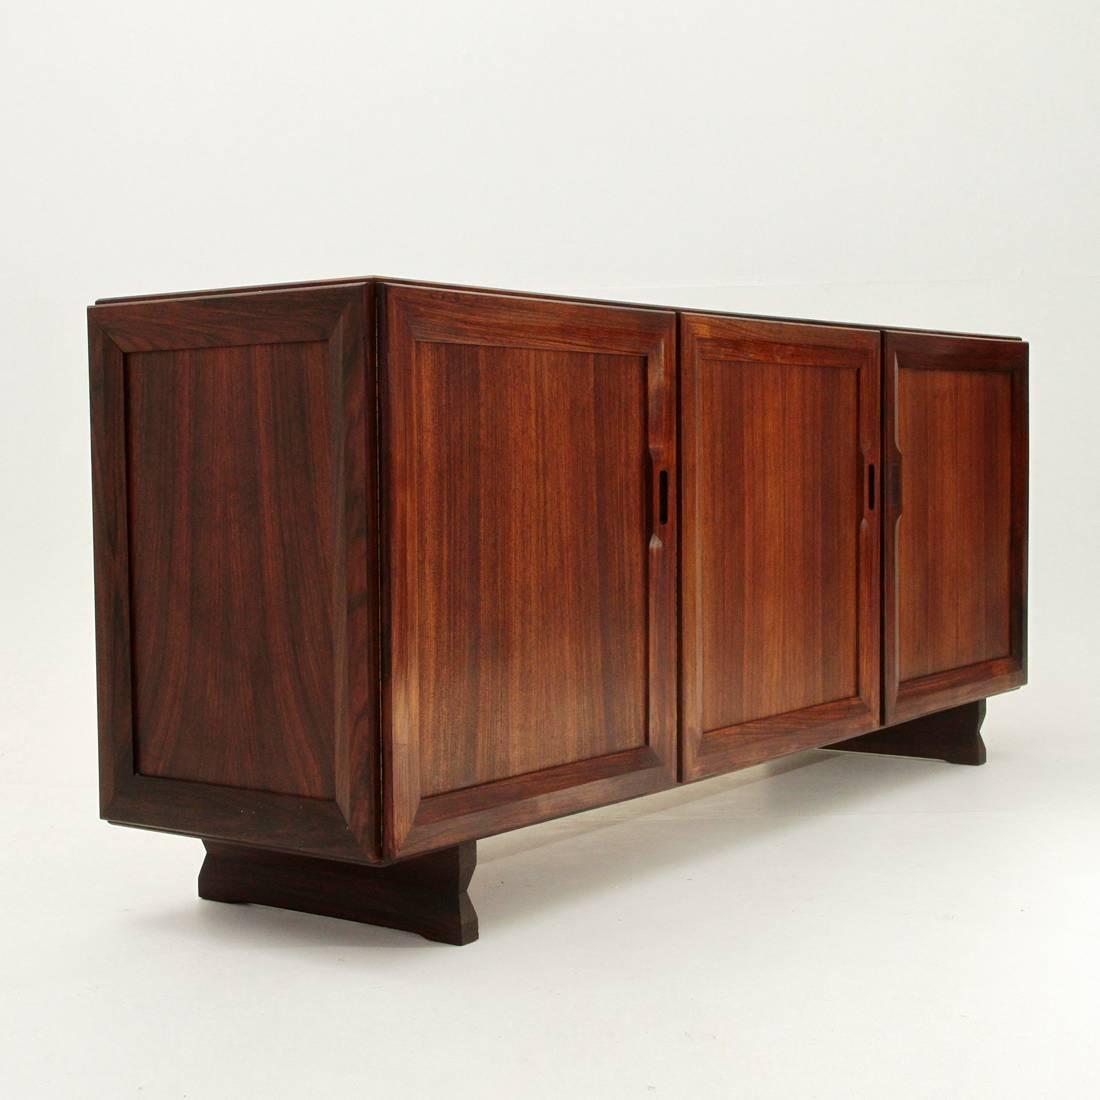 Italian mobile designed in 1957 by Franco Albini for Poggi.
Rosewood structure, three storage compartments with shelves and removable tray.
Dimensions: Width 182 cm x depth 47 cm x height 77 cm.